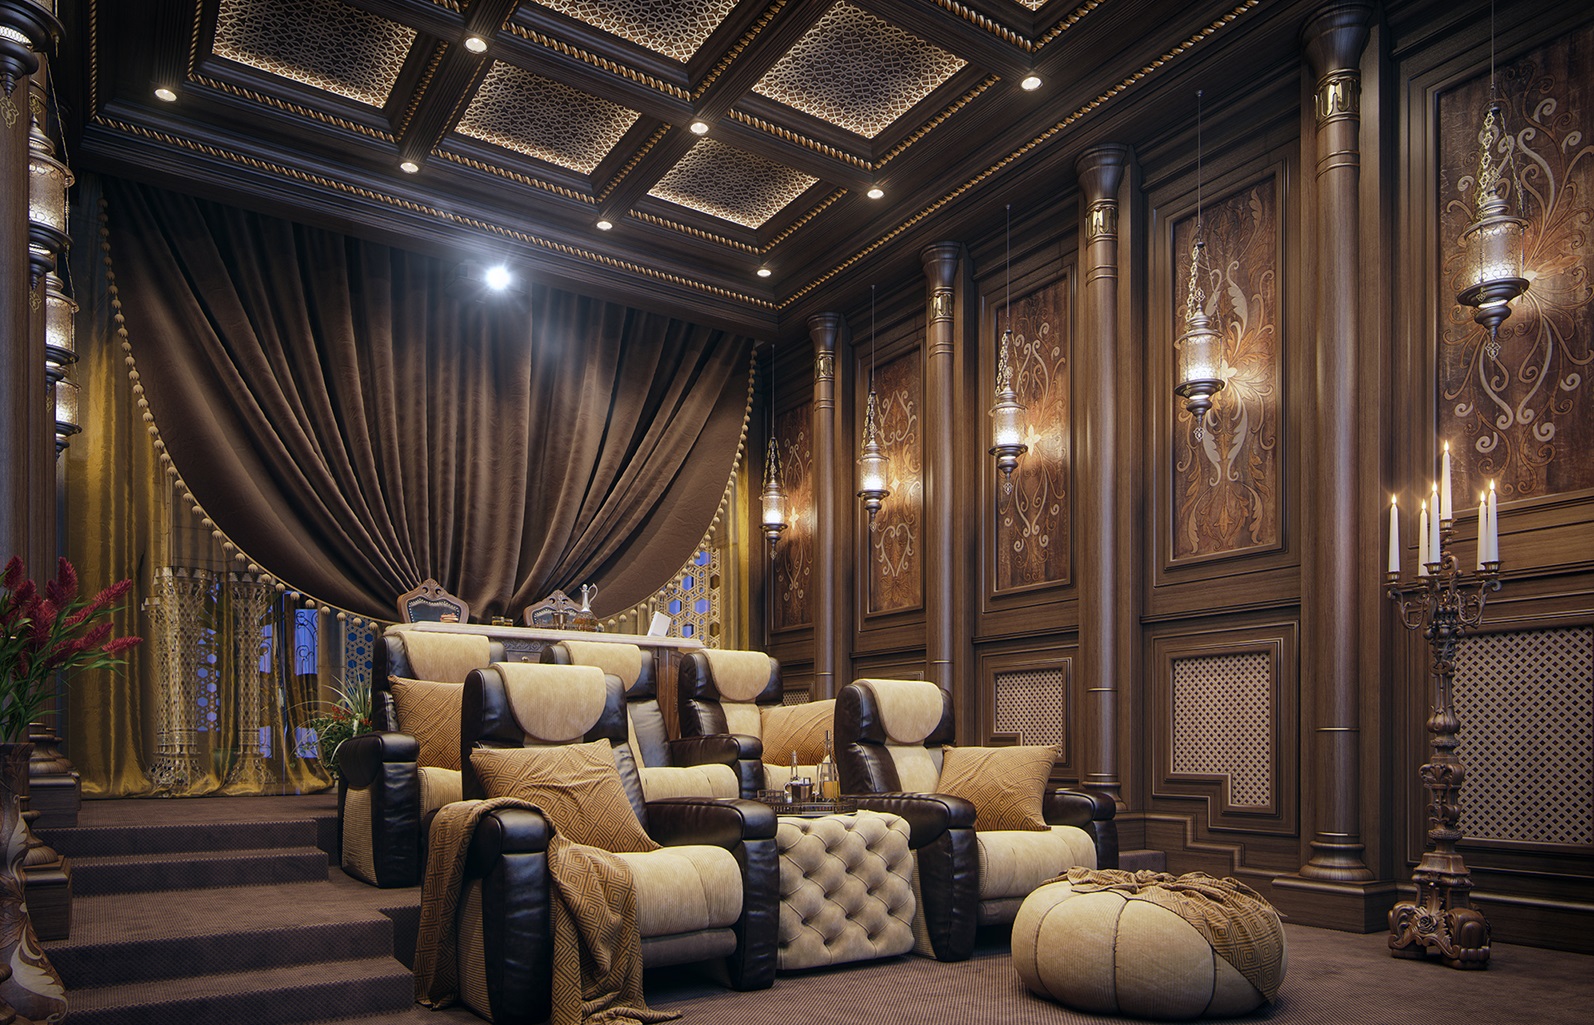 Luxury Home Theater Design Pictures ~ Modern Home Design And House